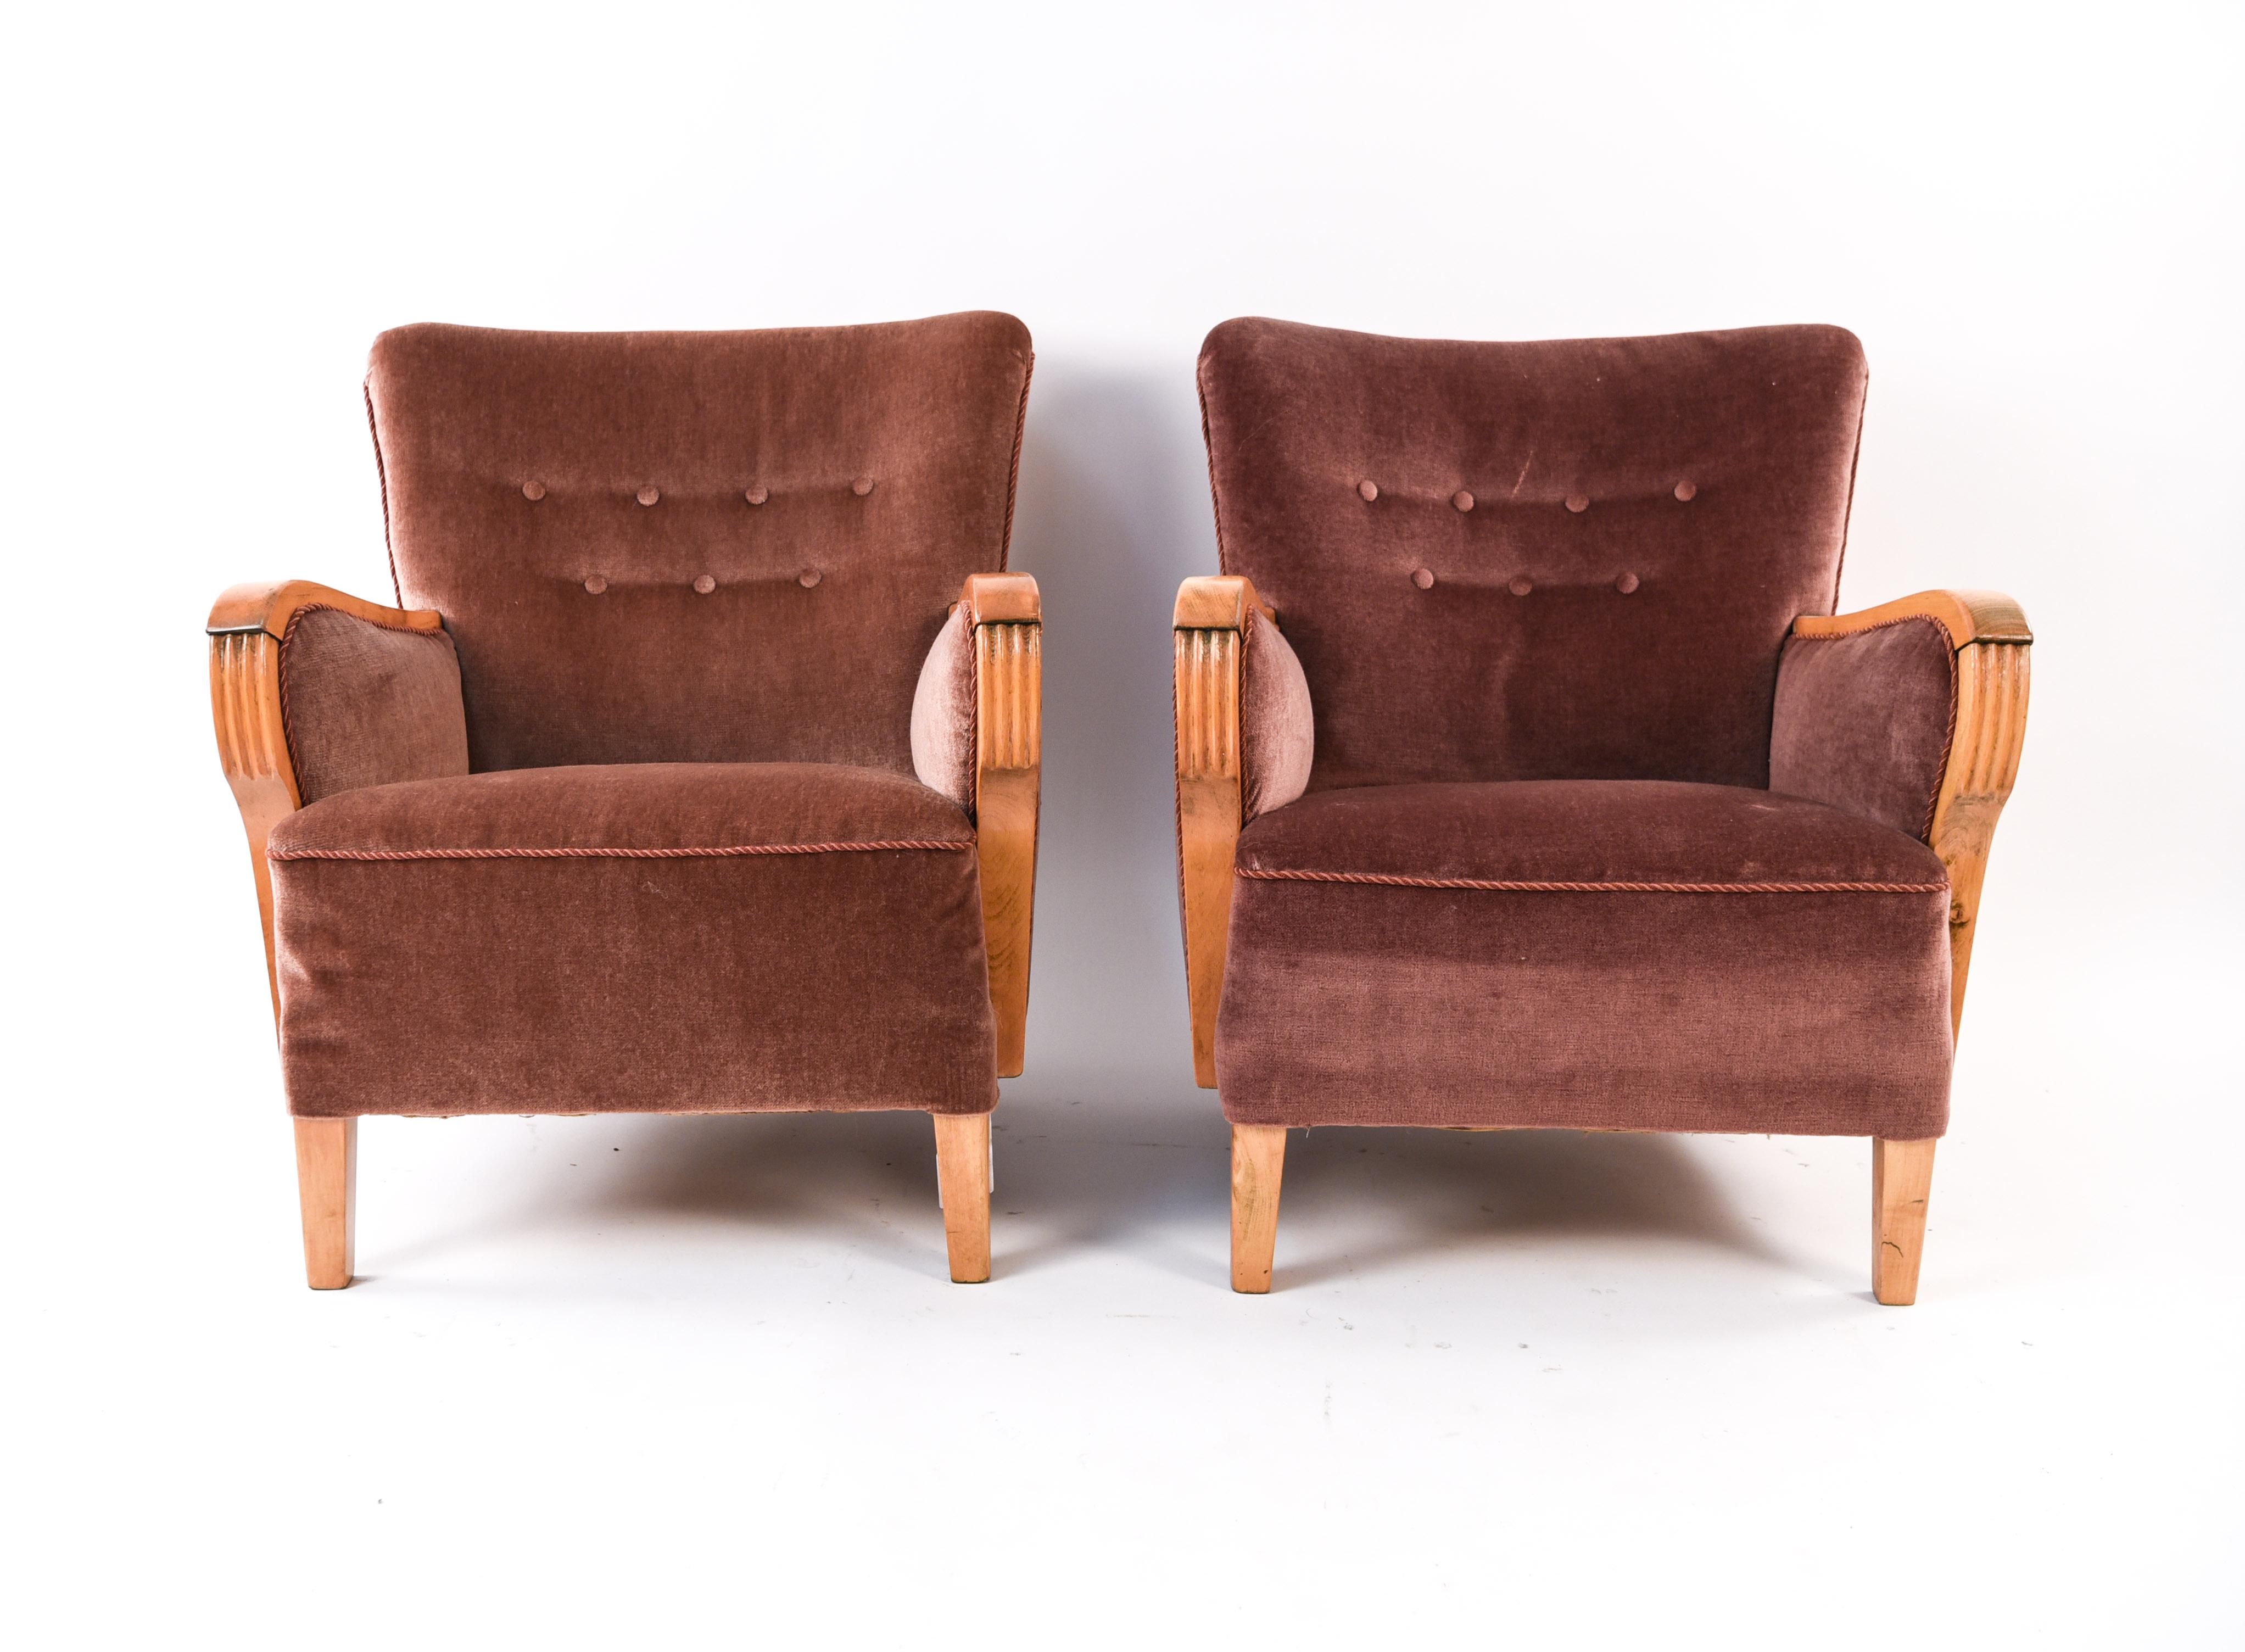 This fun pair of Danish 1940s club chairs is upholstered in a purple velvet-like mohair material. Featuring wood accents with fluted areas along the arms and button tufts on the backs.